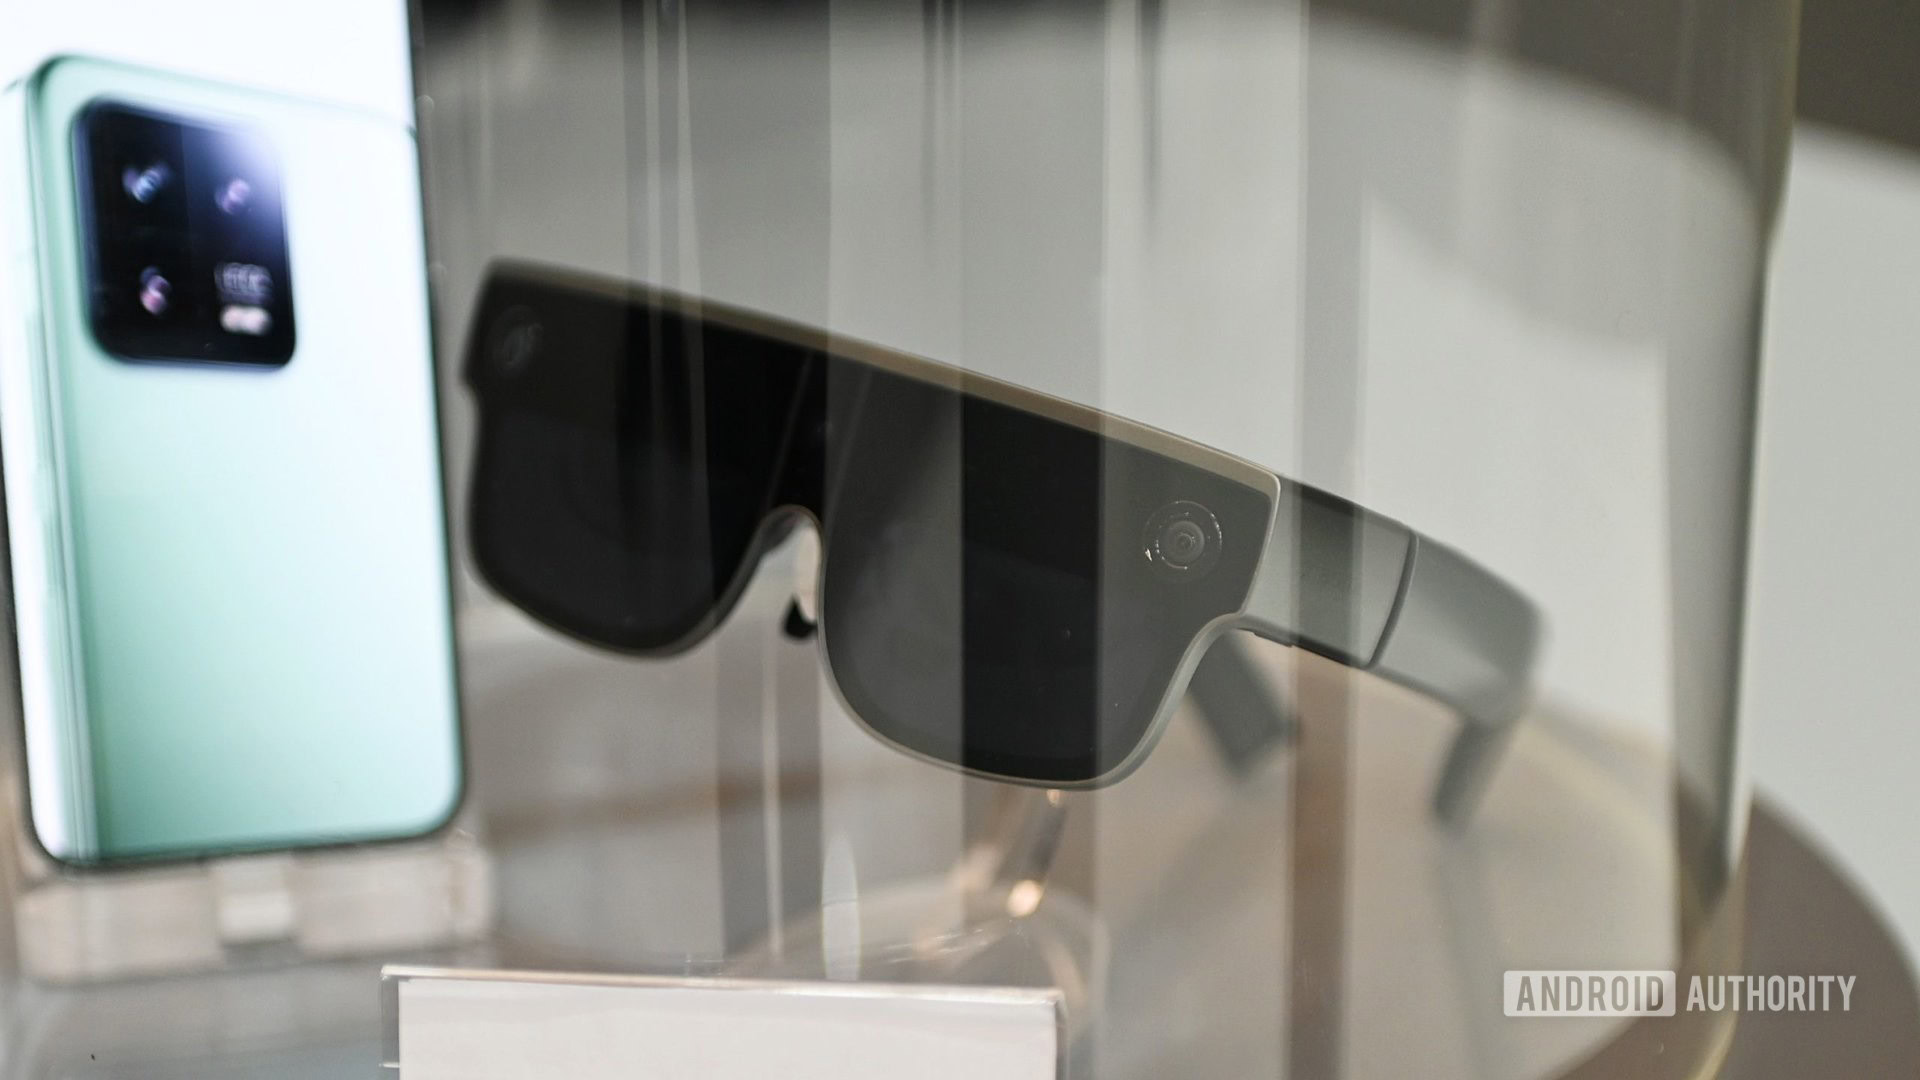 Apple is still working on AR smart glasses and two recent patents show some  impressive innovations — better thermal ergonomics and eyewear  stabilization